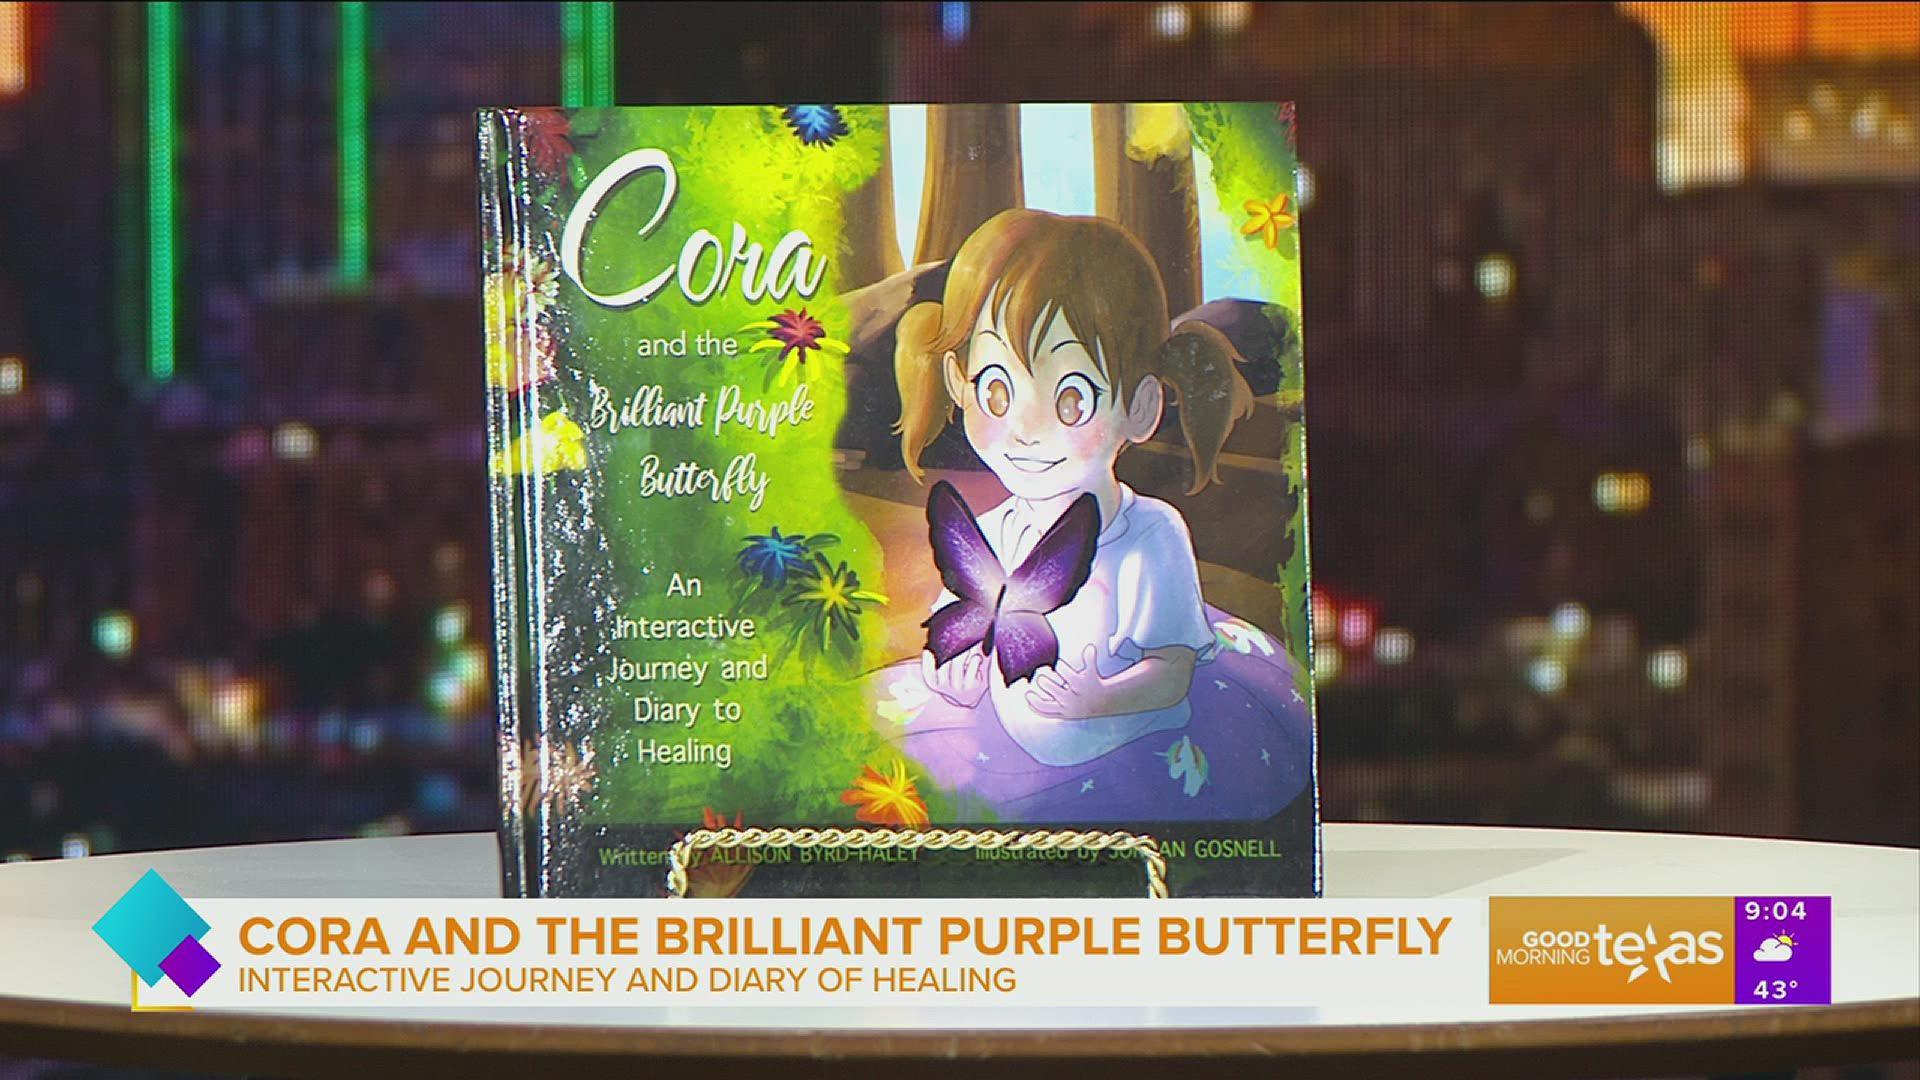 Cora and the Brilliant Purple Butterfly”